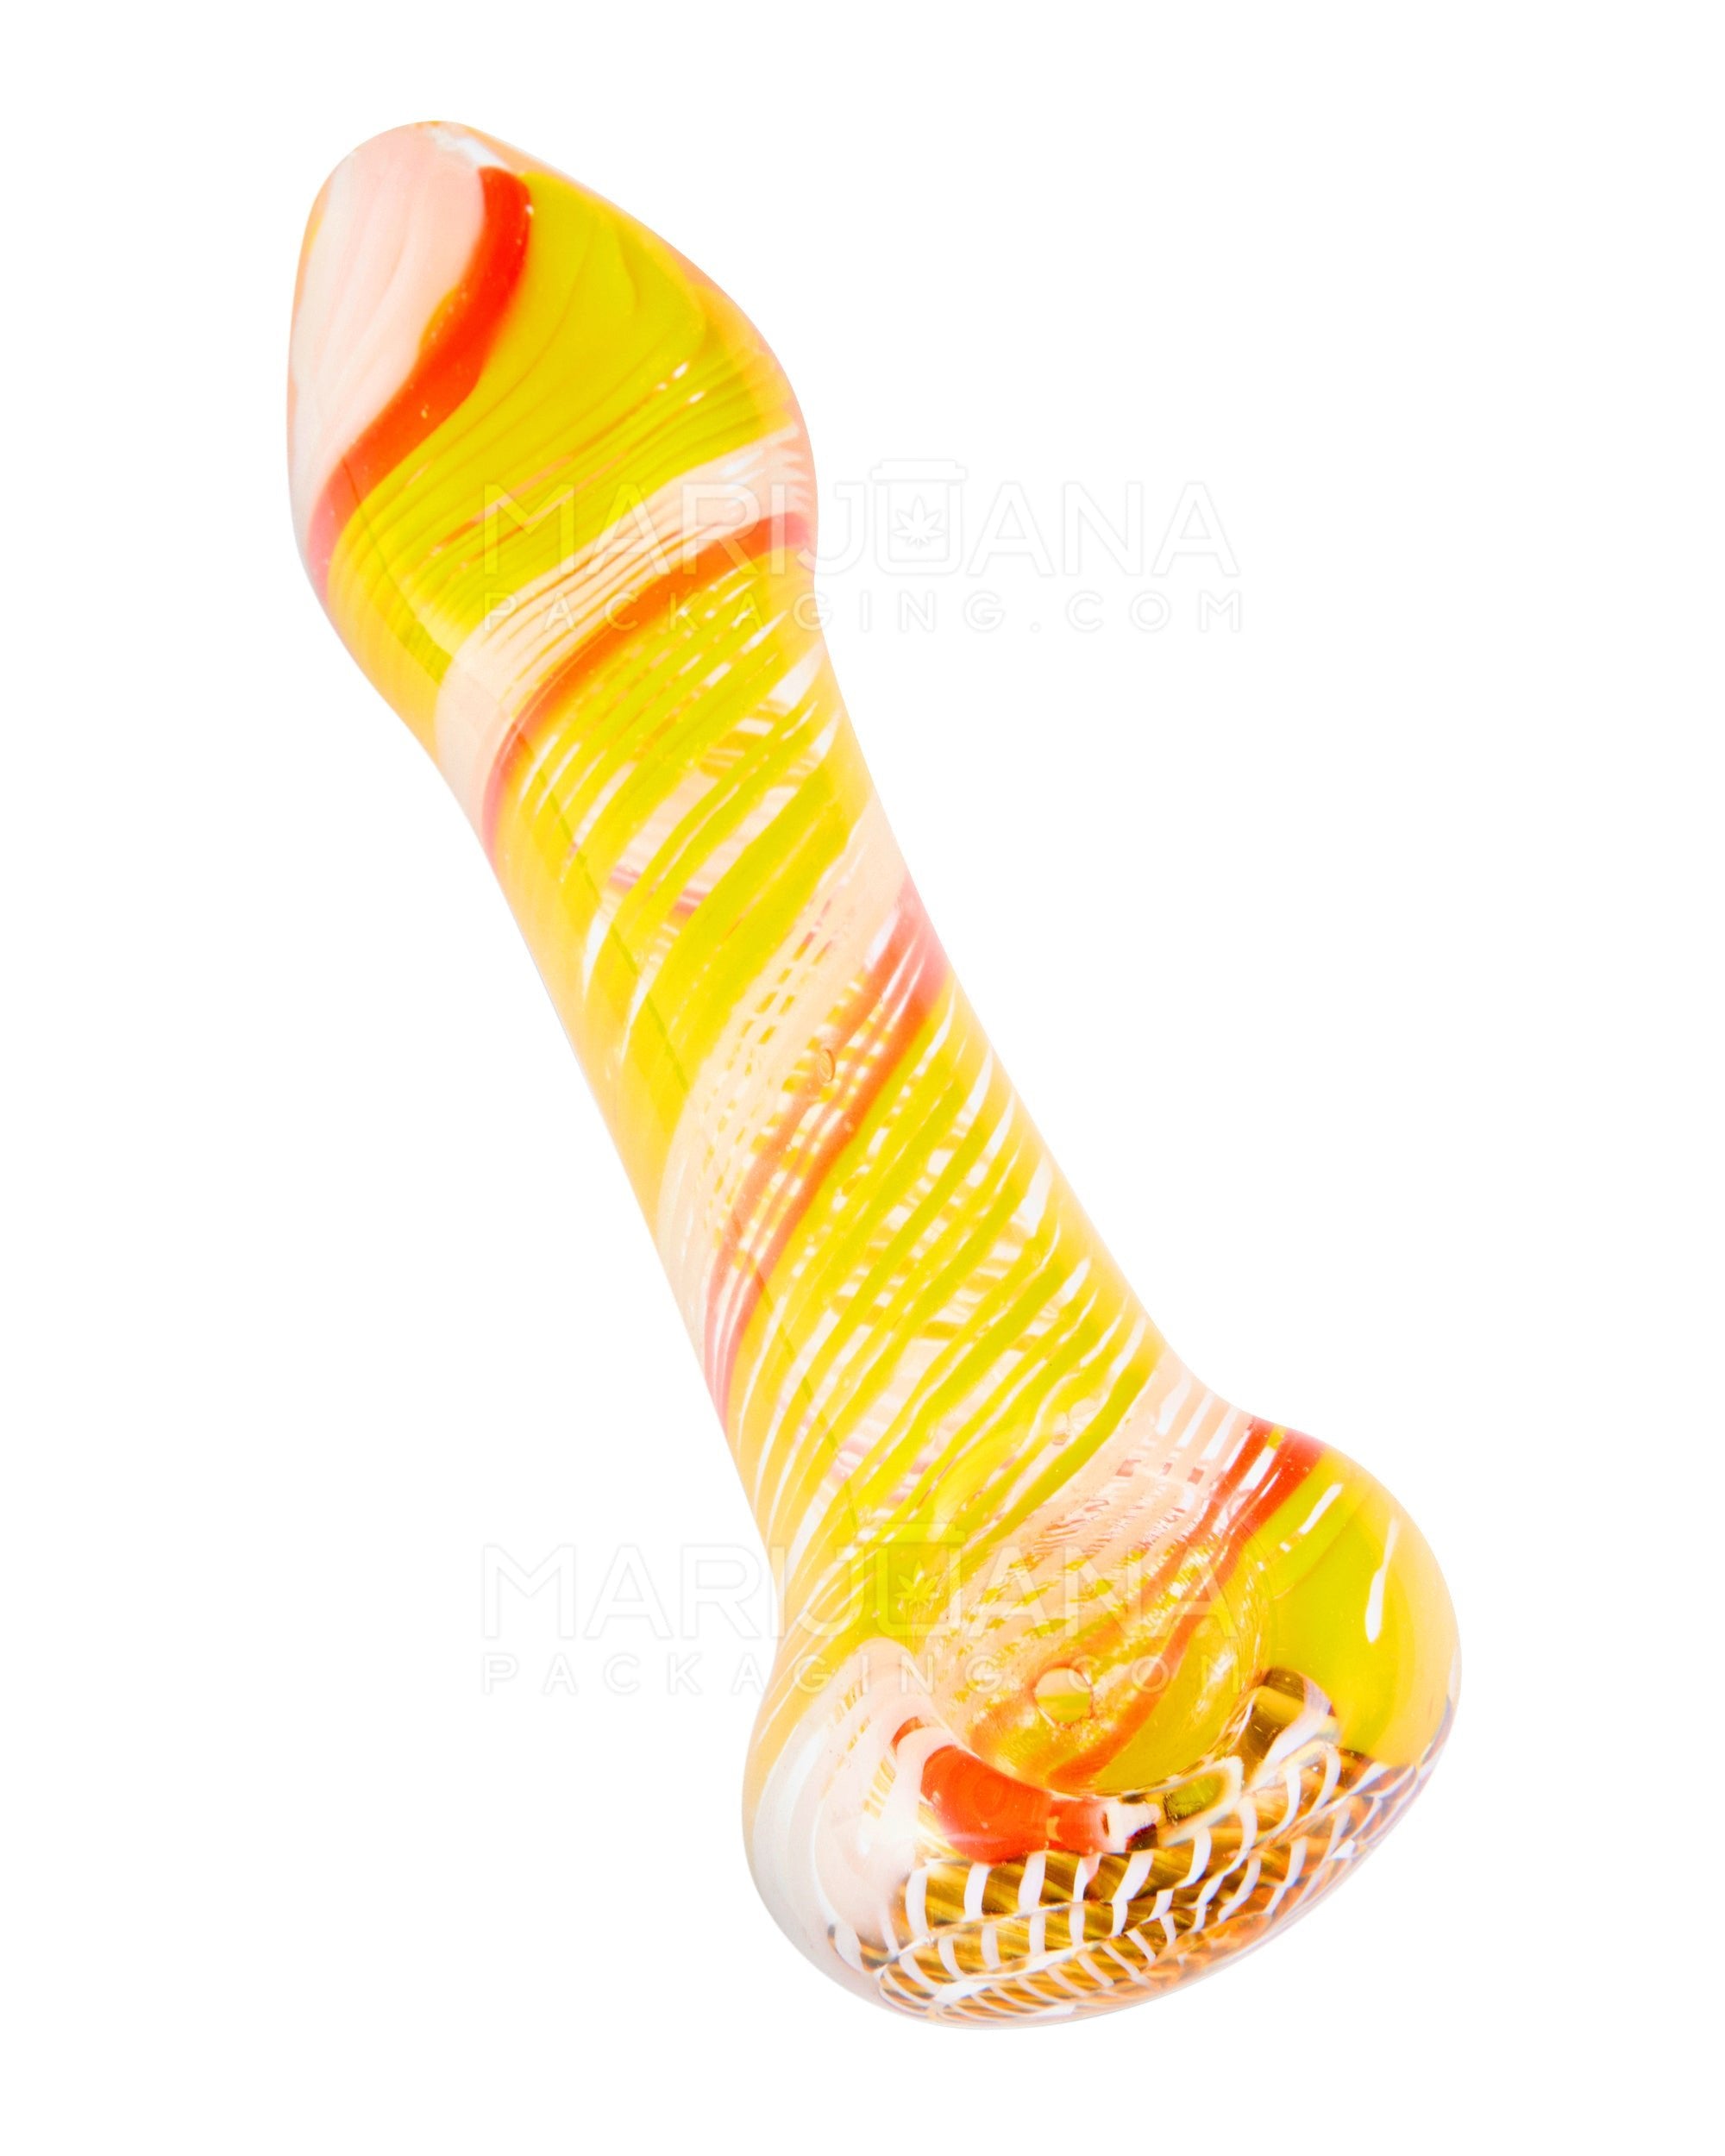 Variety Mouthpiece Spiral Spoon Hand Pipe w/ Ribboning | 4.5in Long - Glass - Assorted - 7